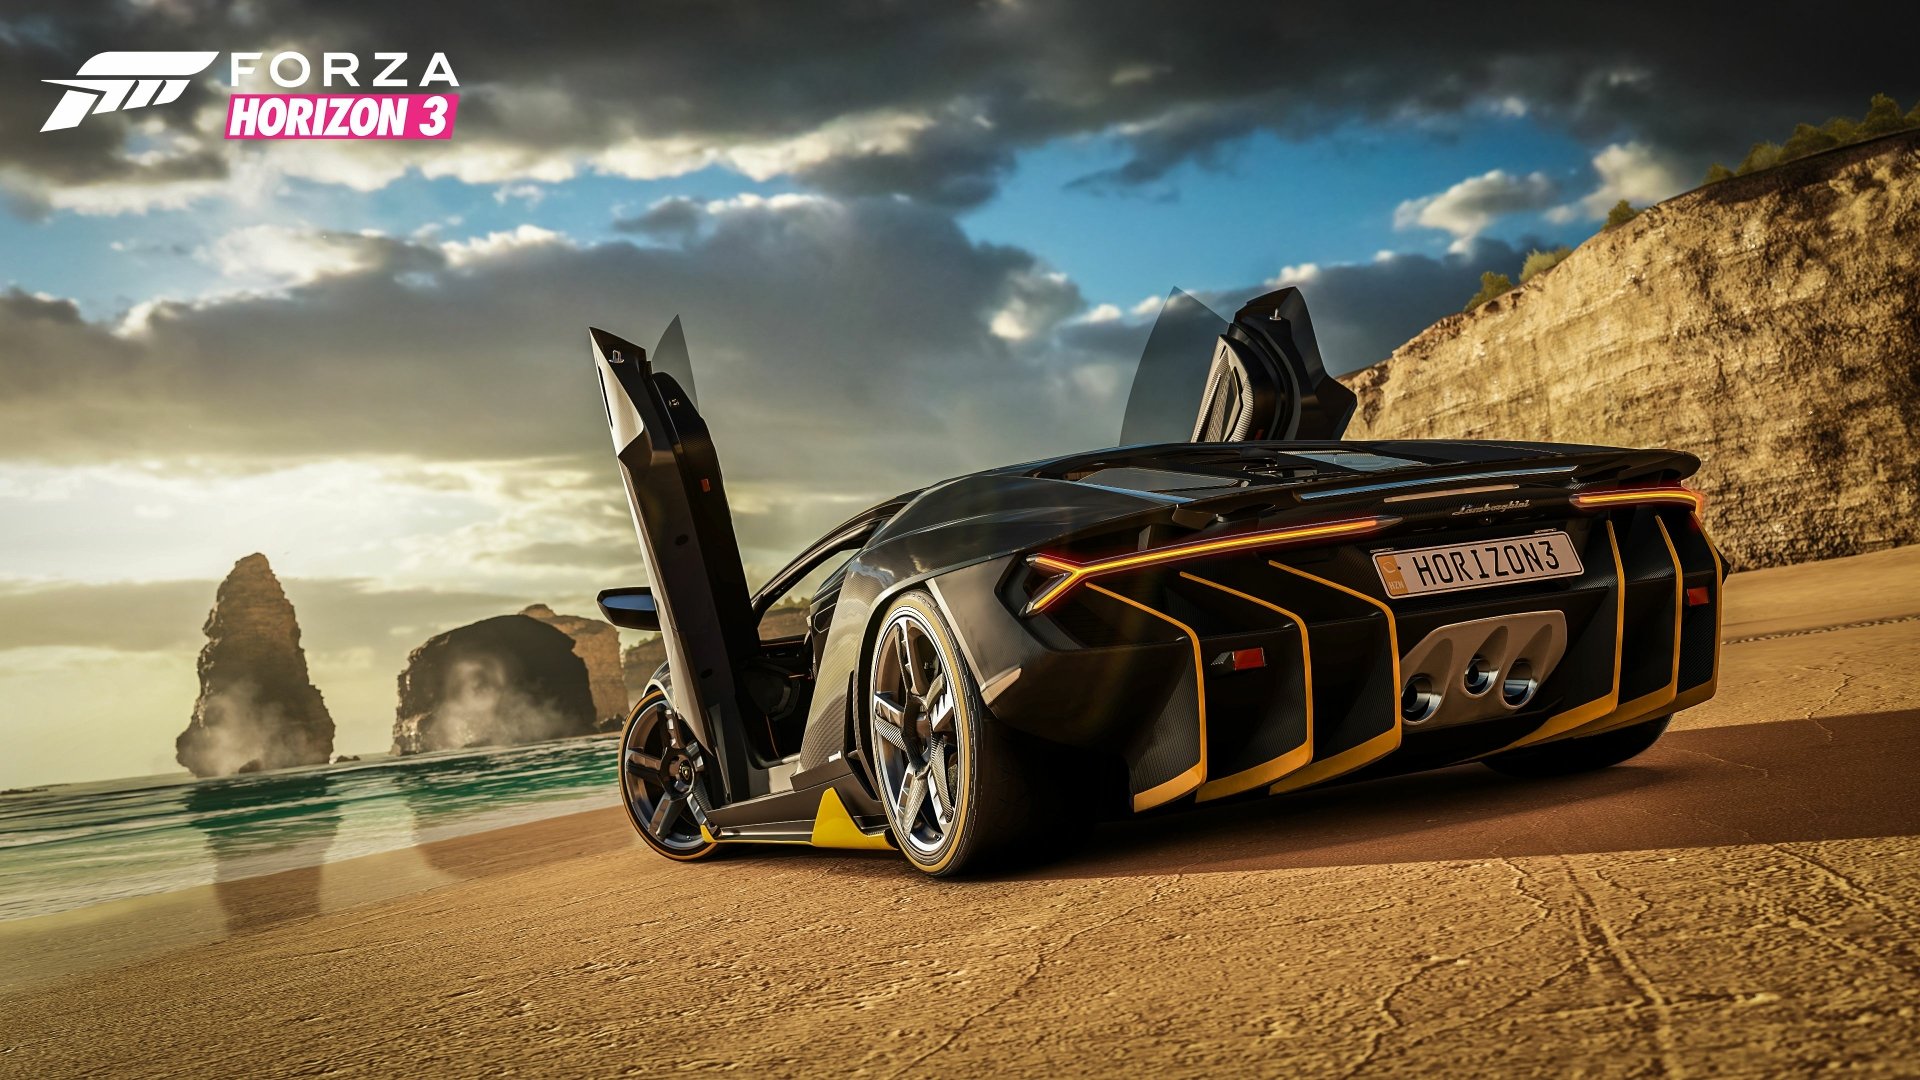 371 forza horizon 3 hd wallpapers background images wallpaper abyss 371 forza horizon 3 hd wallpapers